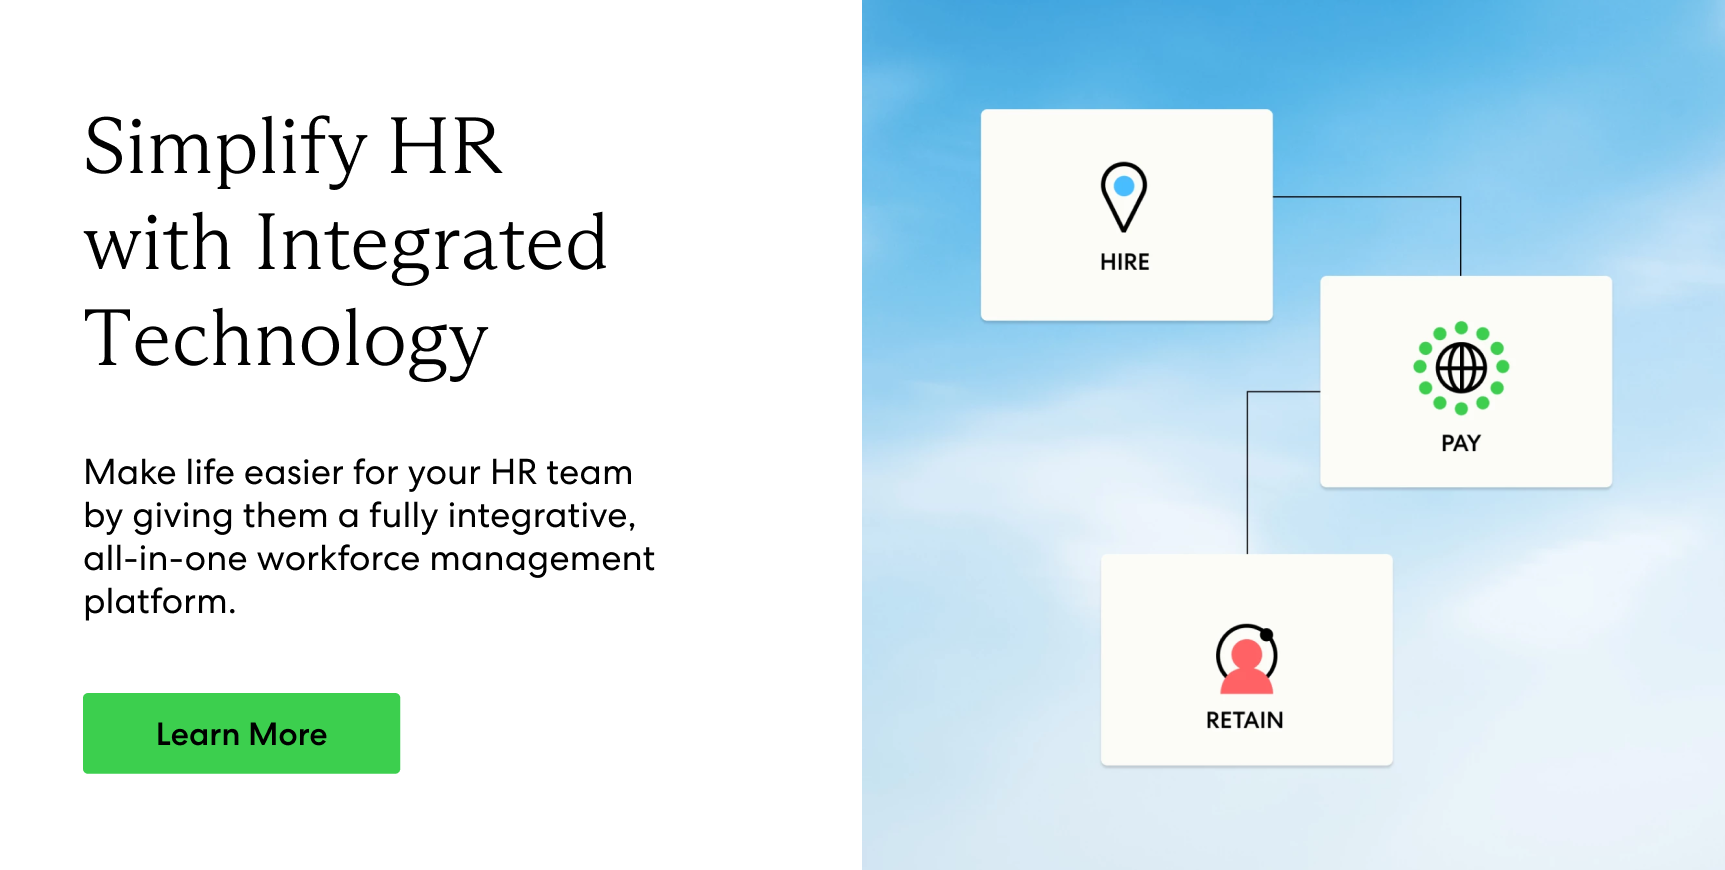 Make life easier for your HR team by giving them a fully integrative, all-in-one workforce management platform.